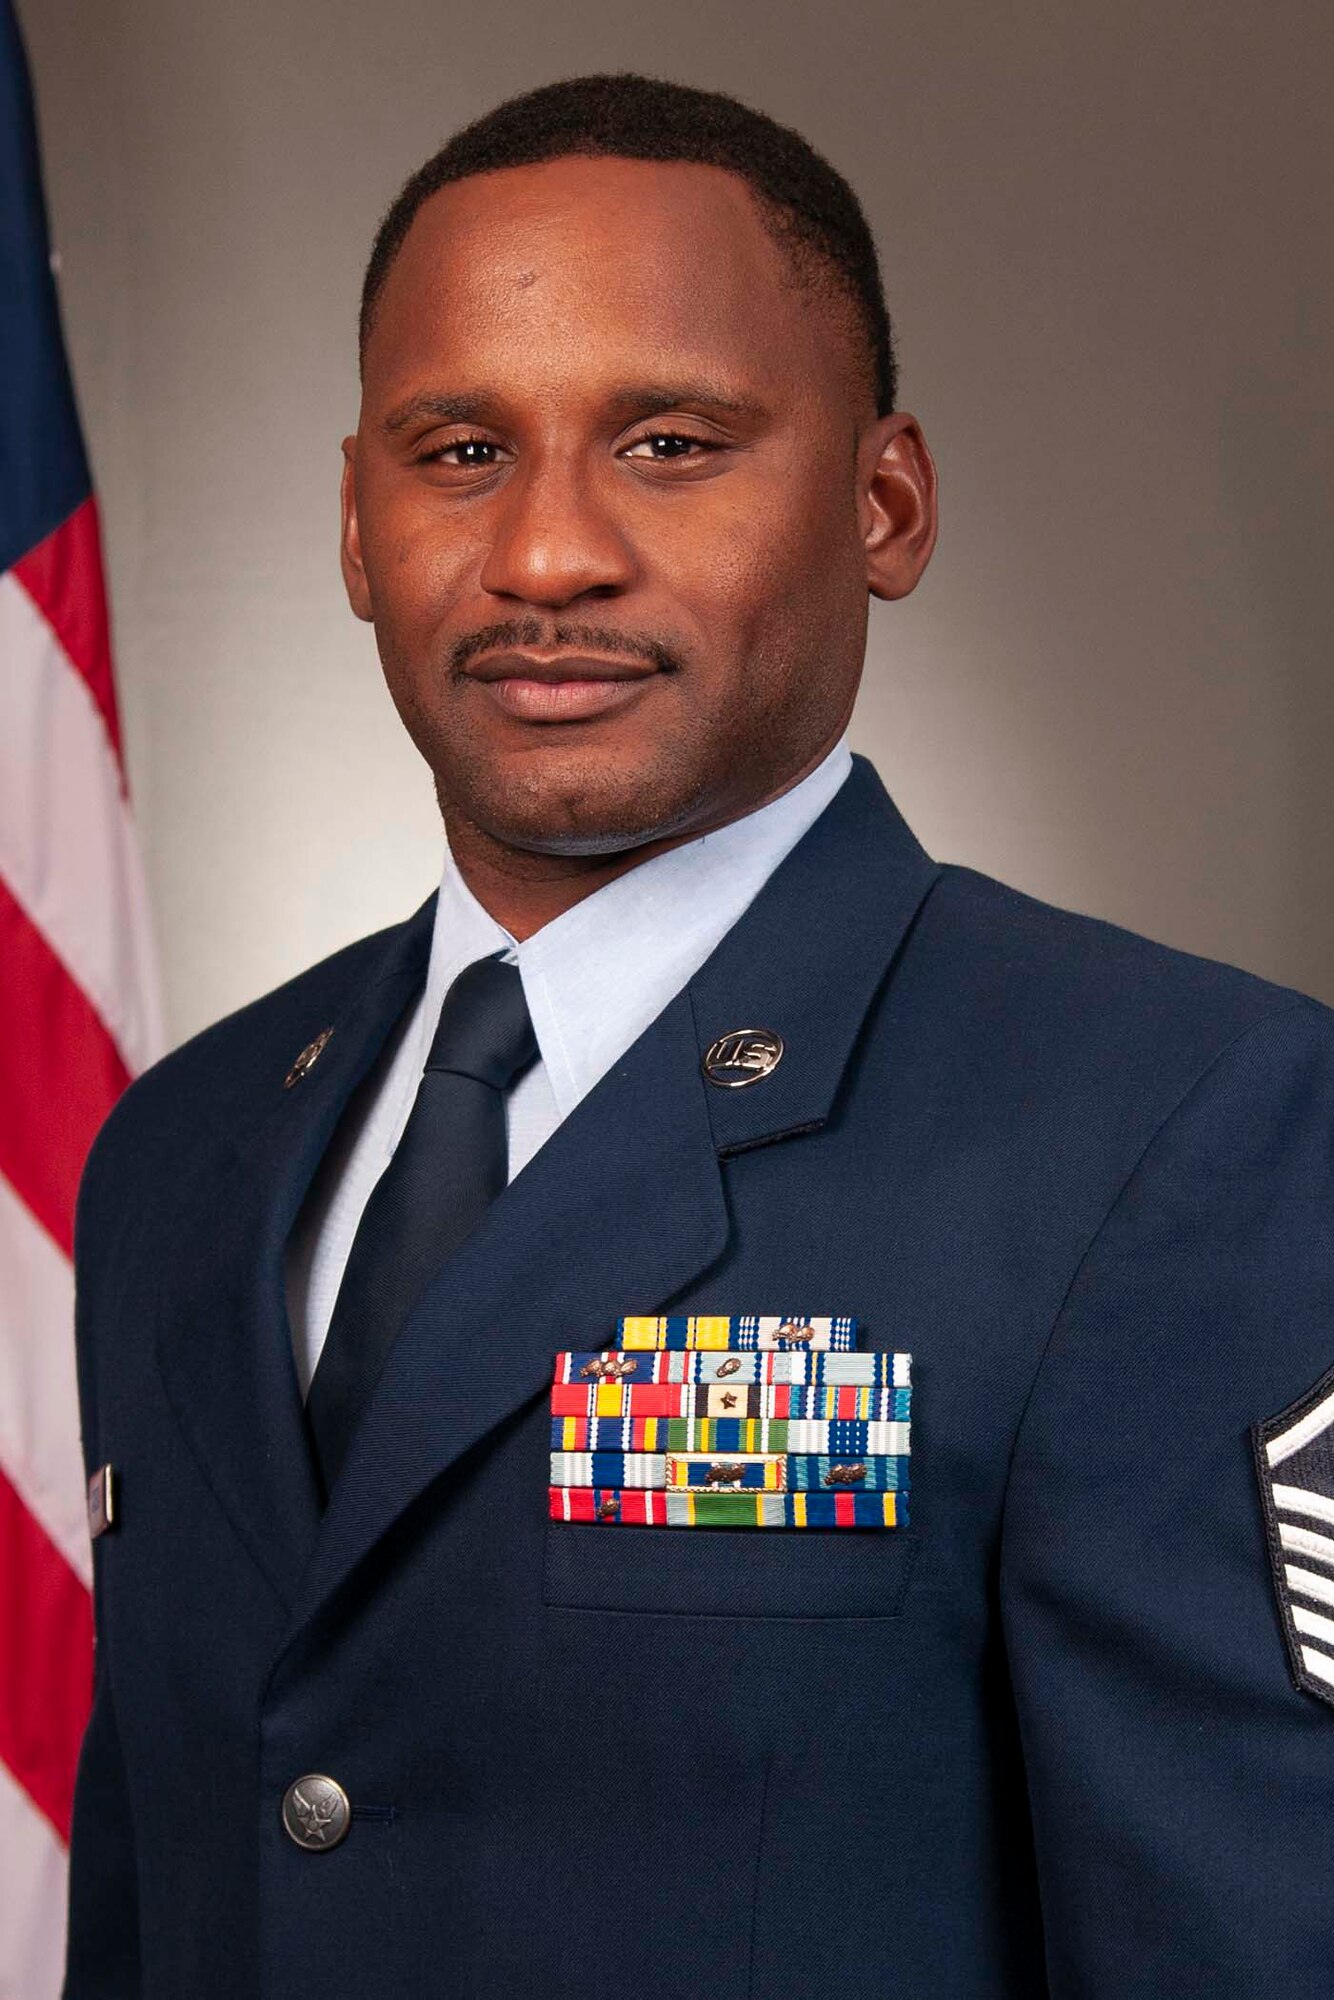 Carlos Jackson poses for a photo in his Air Force uniform.